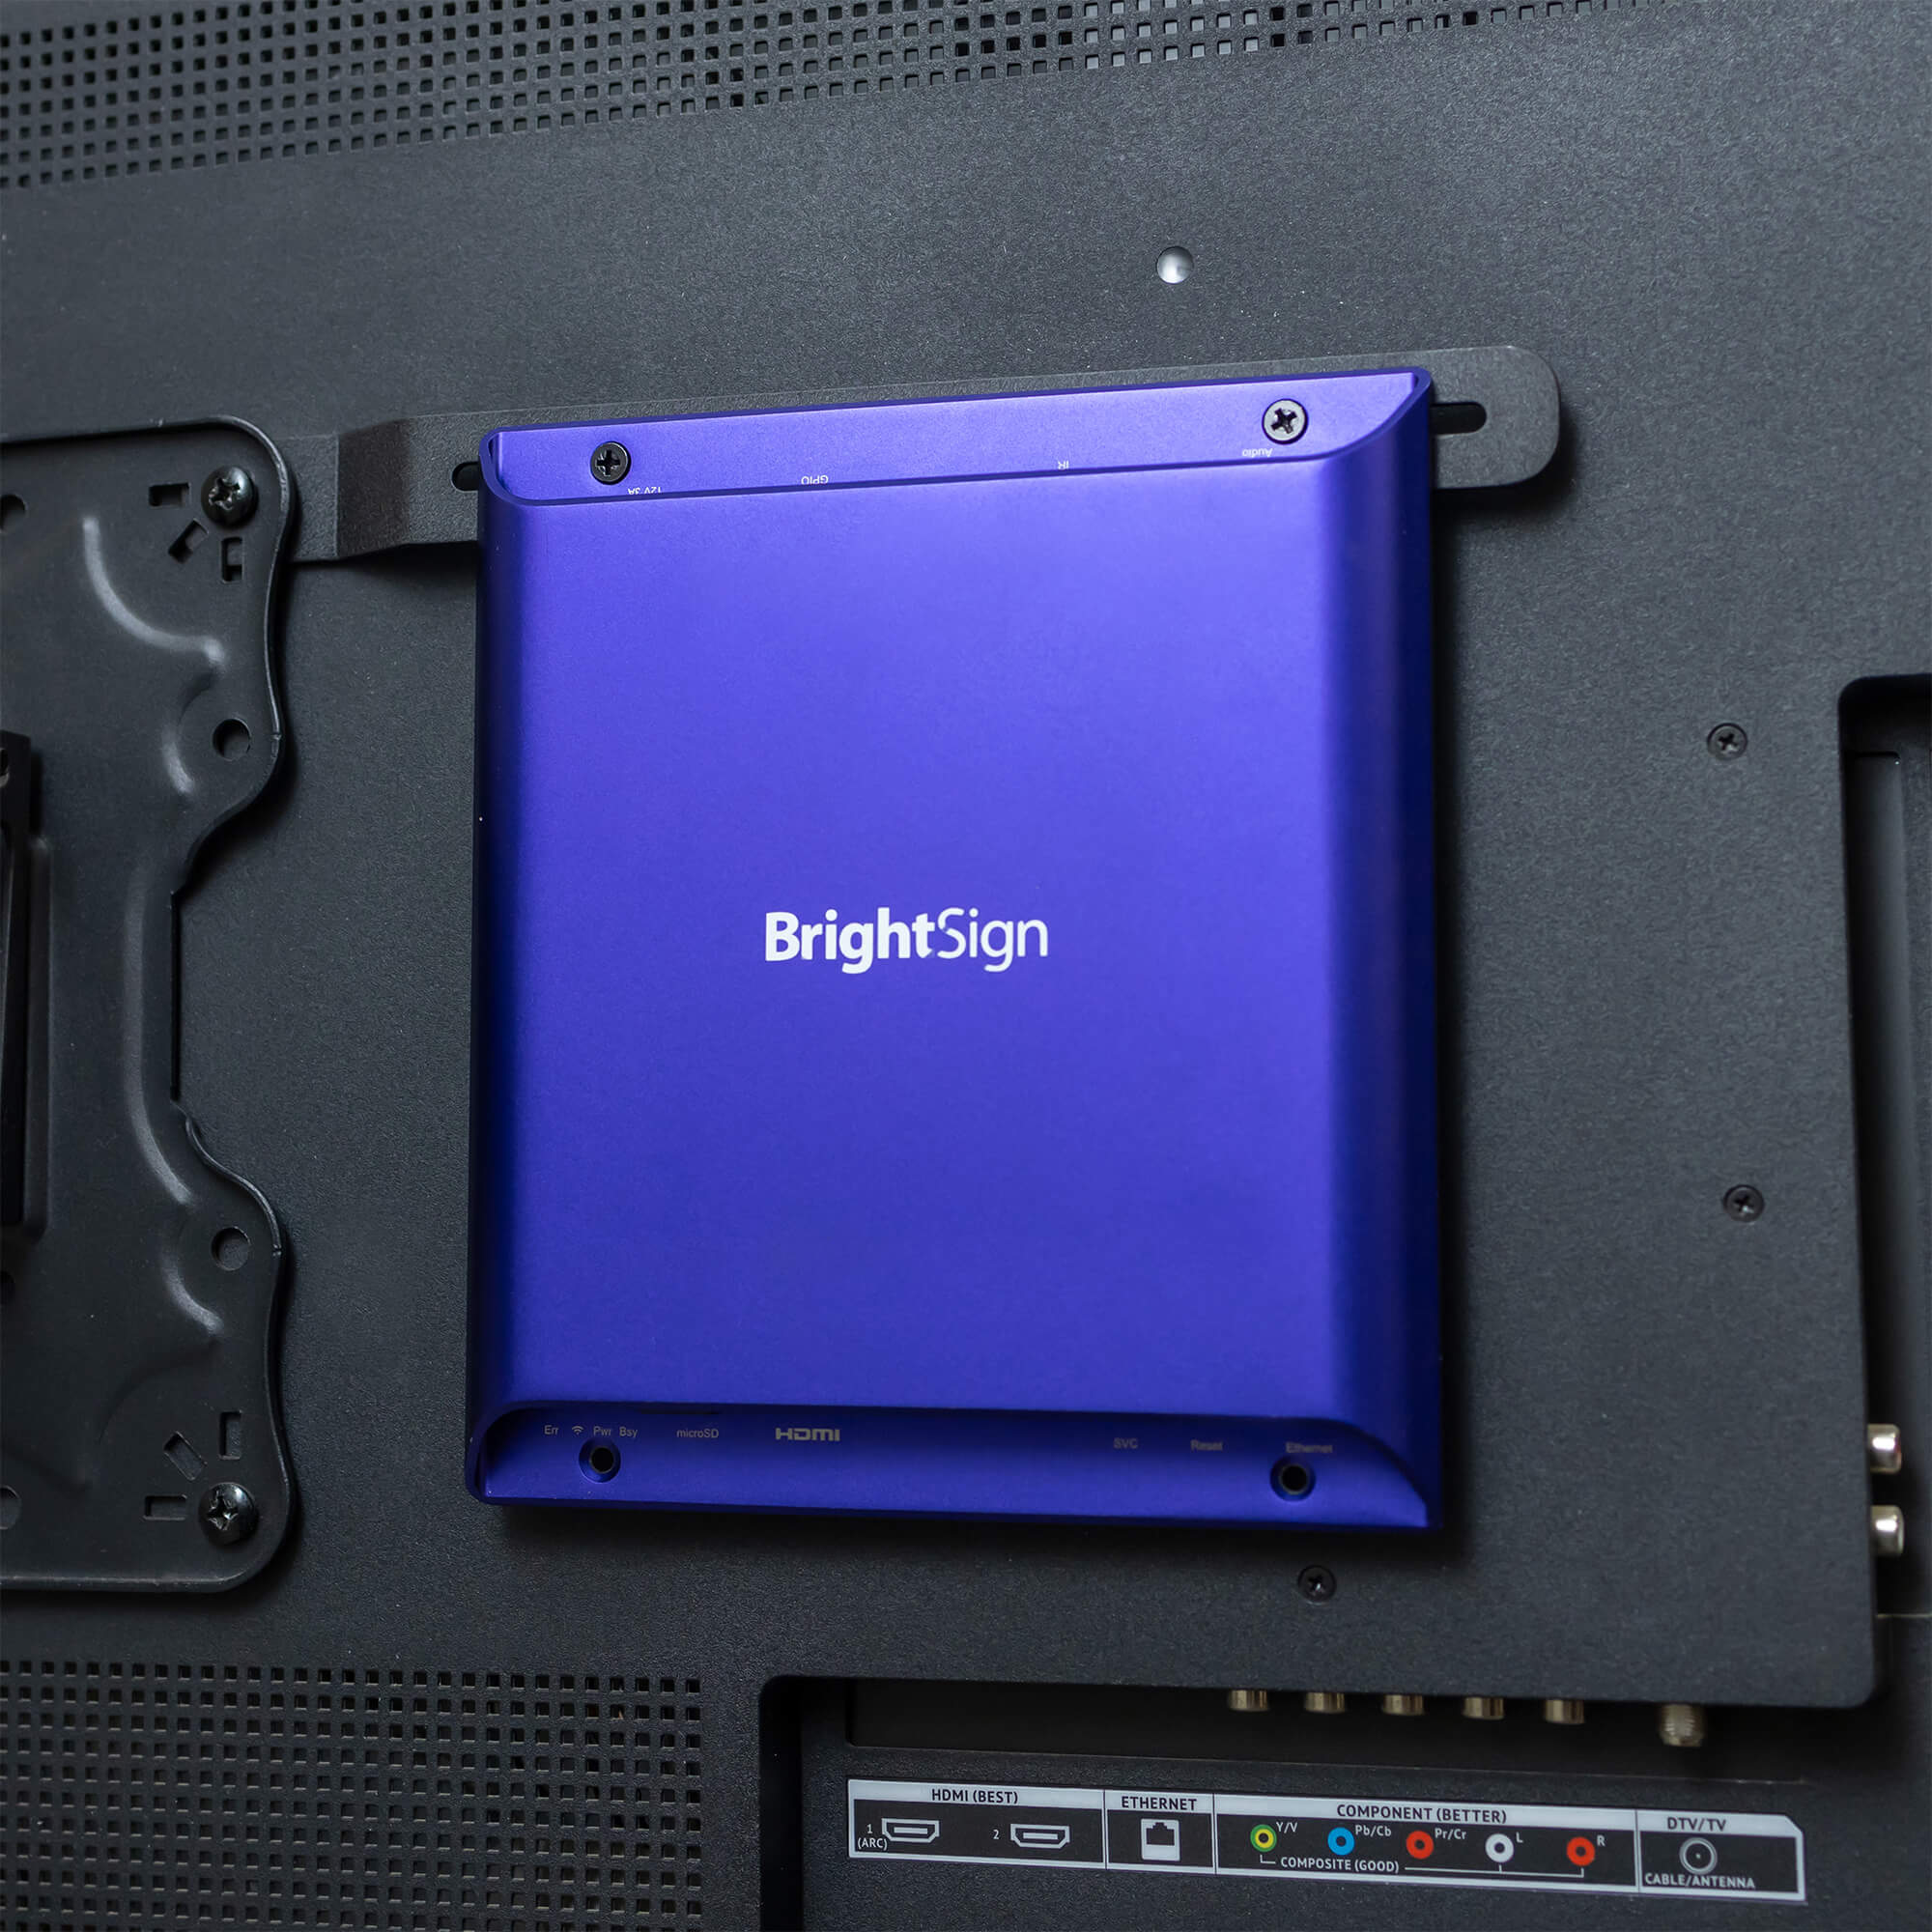 Flush mount design ensures the BrightSign media player is still easy to access and won't block vents or signals.